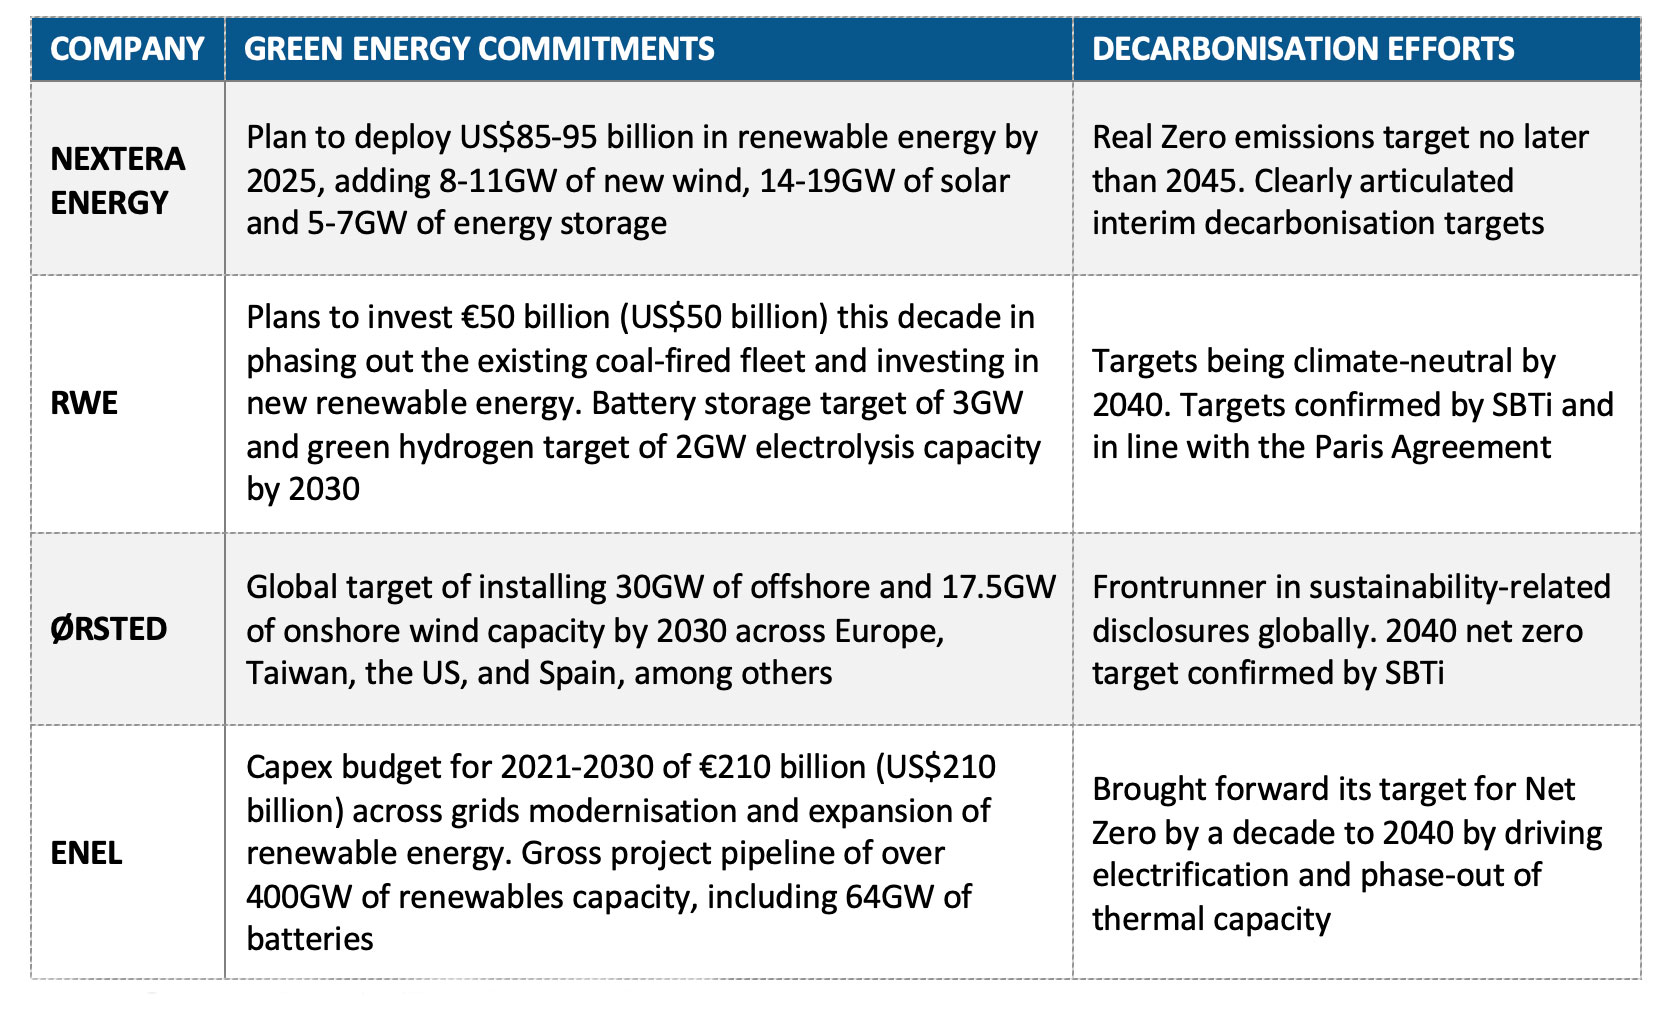 Table-green energy commitments, decarbonisation efforts